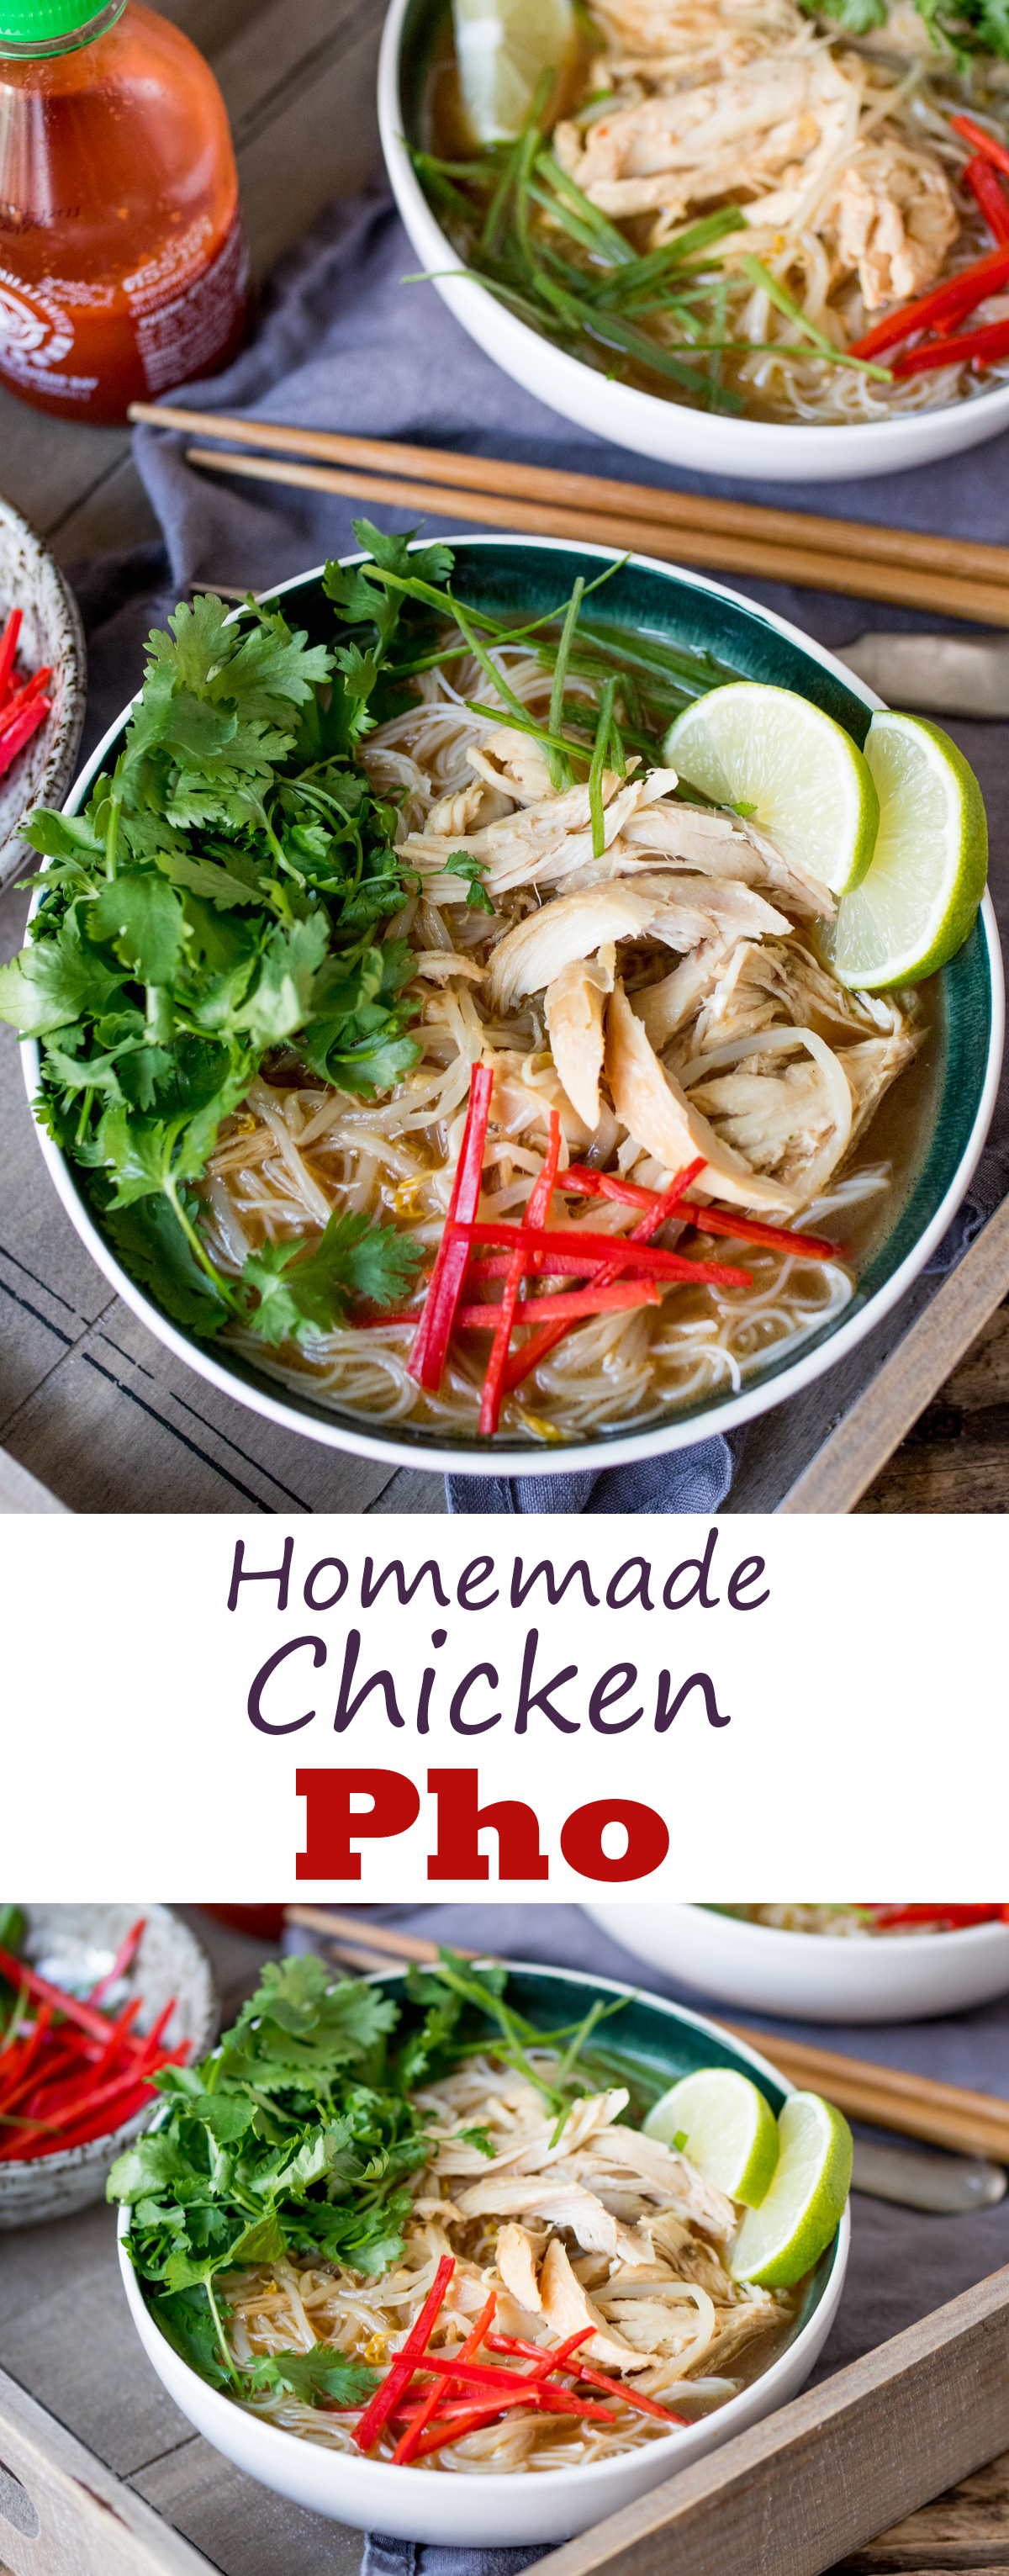 Chicken Pho is bowl food at it's best. Comforting, tasty, nourishing and simple to prepare.